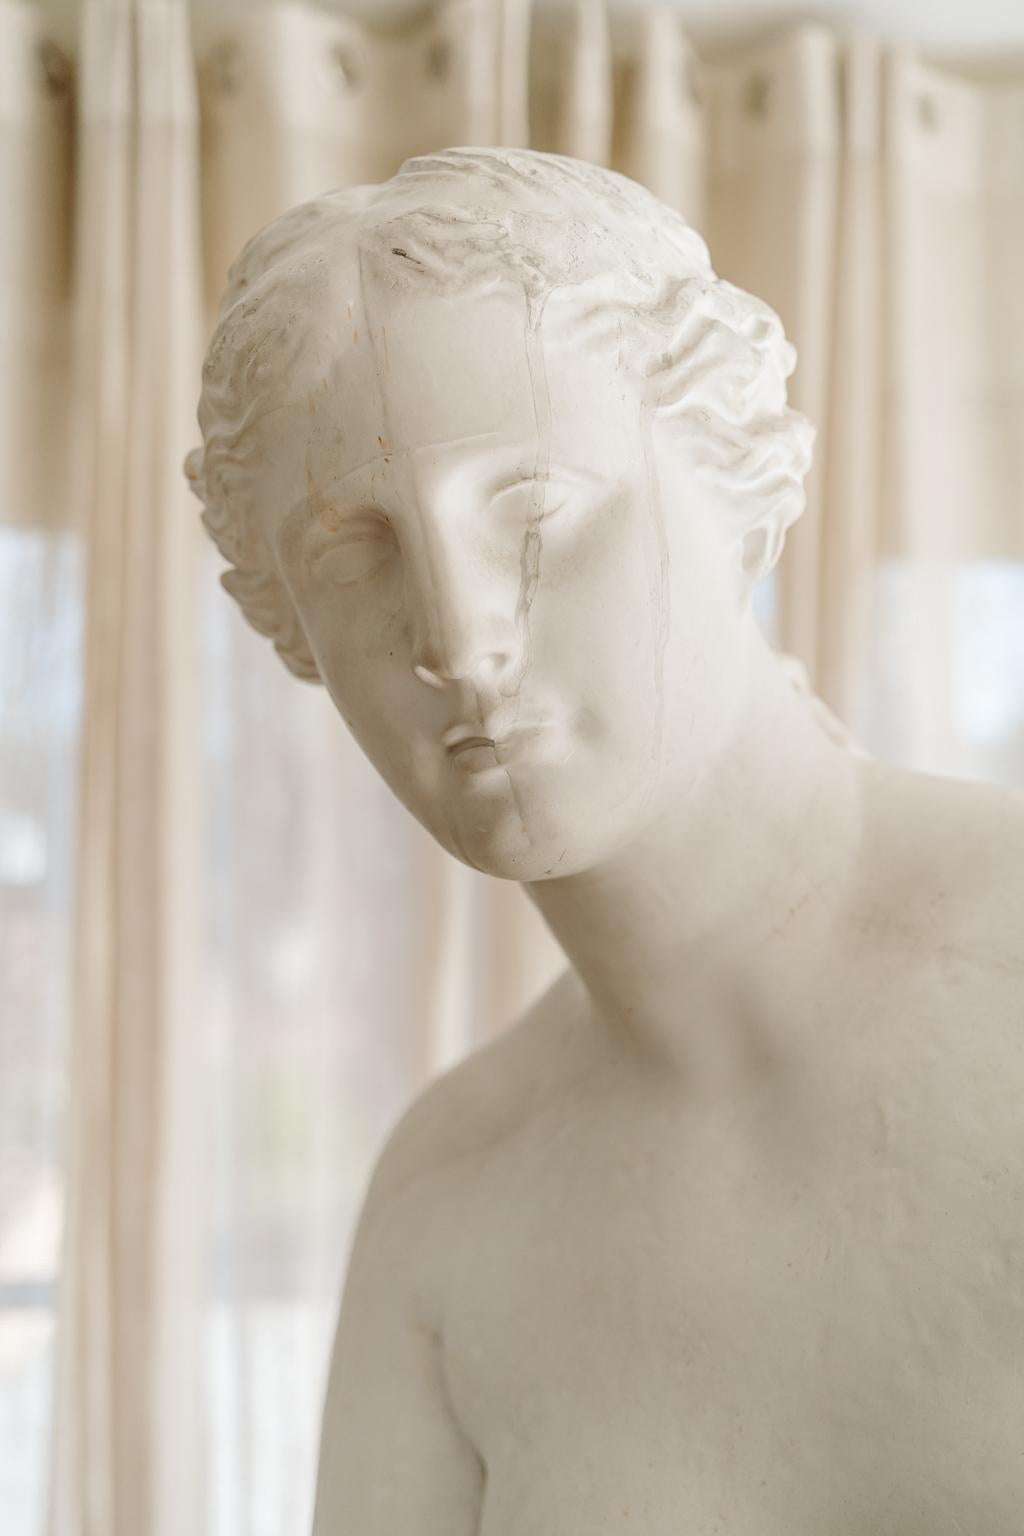 After the antique ... this early 20th century plaster statue of Venus de Milo has great charm and always works in any interior.